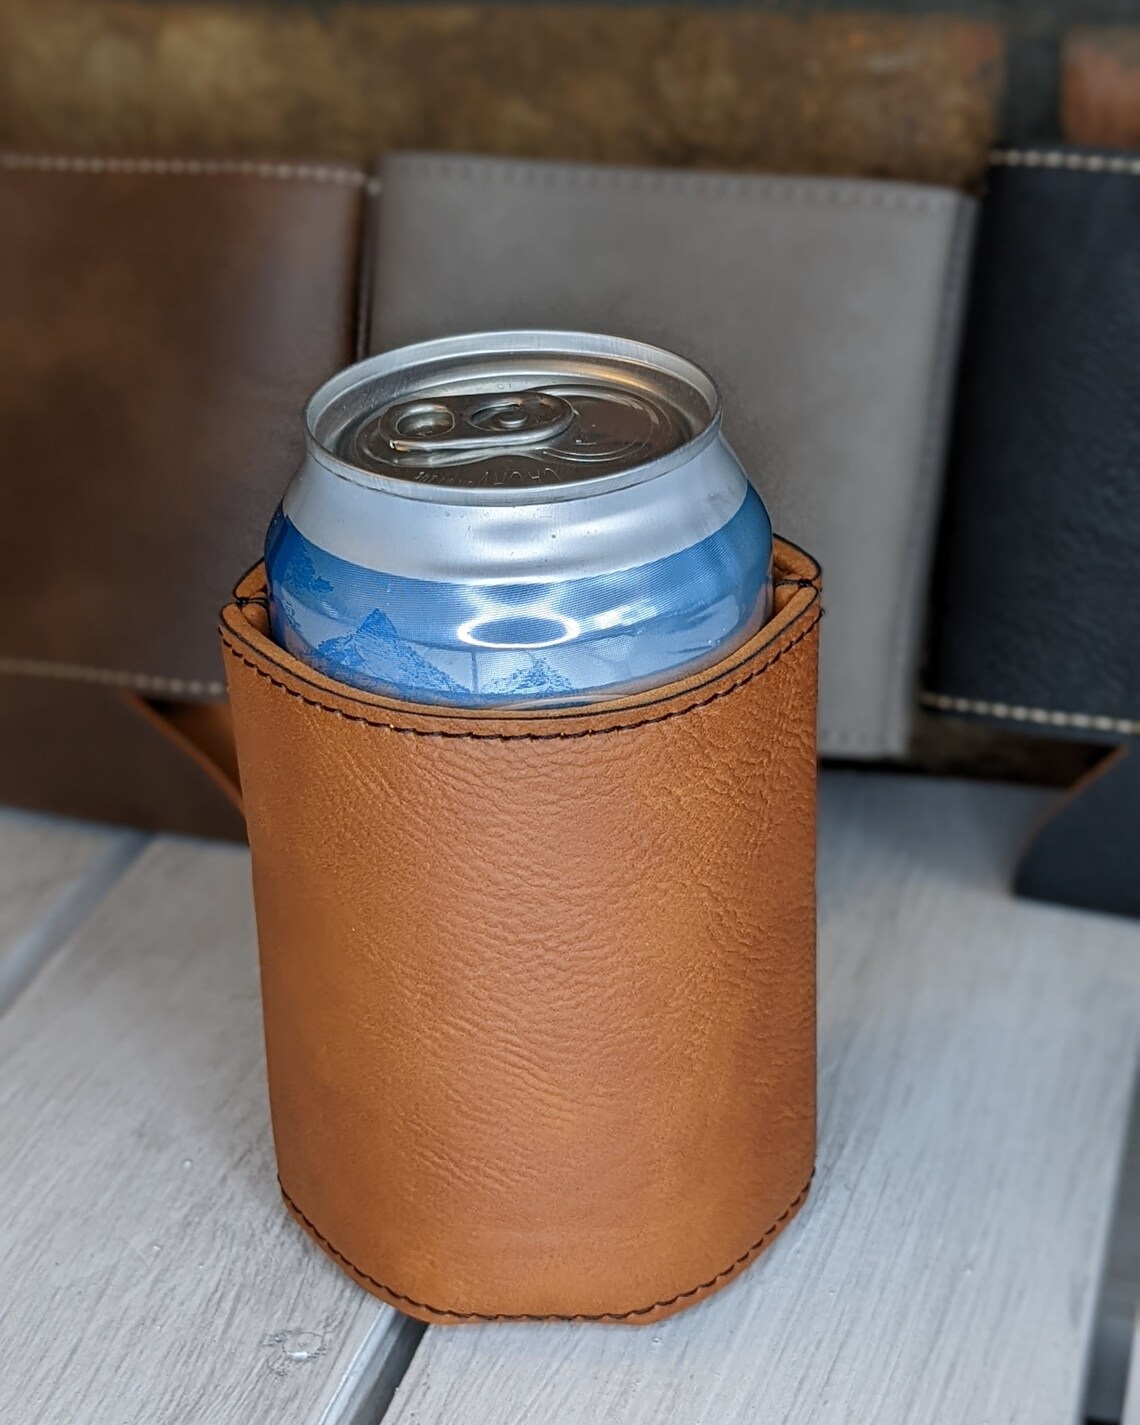 http://www.feartherodent.com/wp-content/uploads/2022/05/Leather-Koozie1.jpg